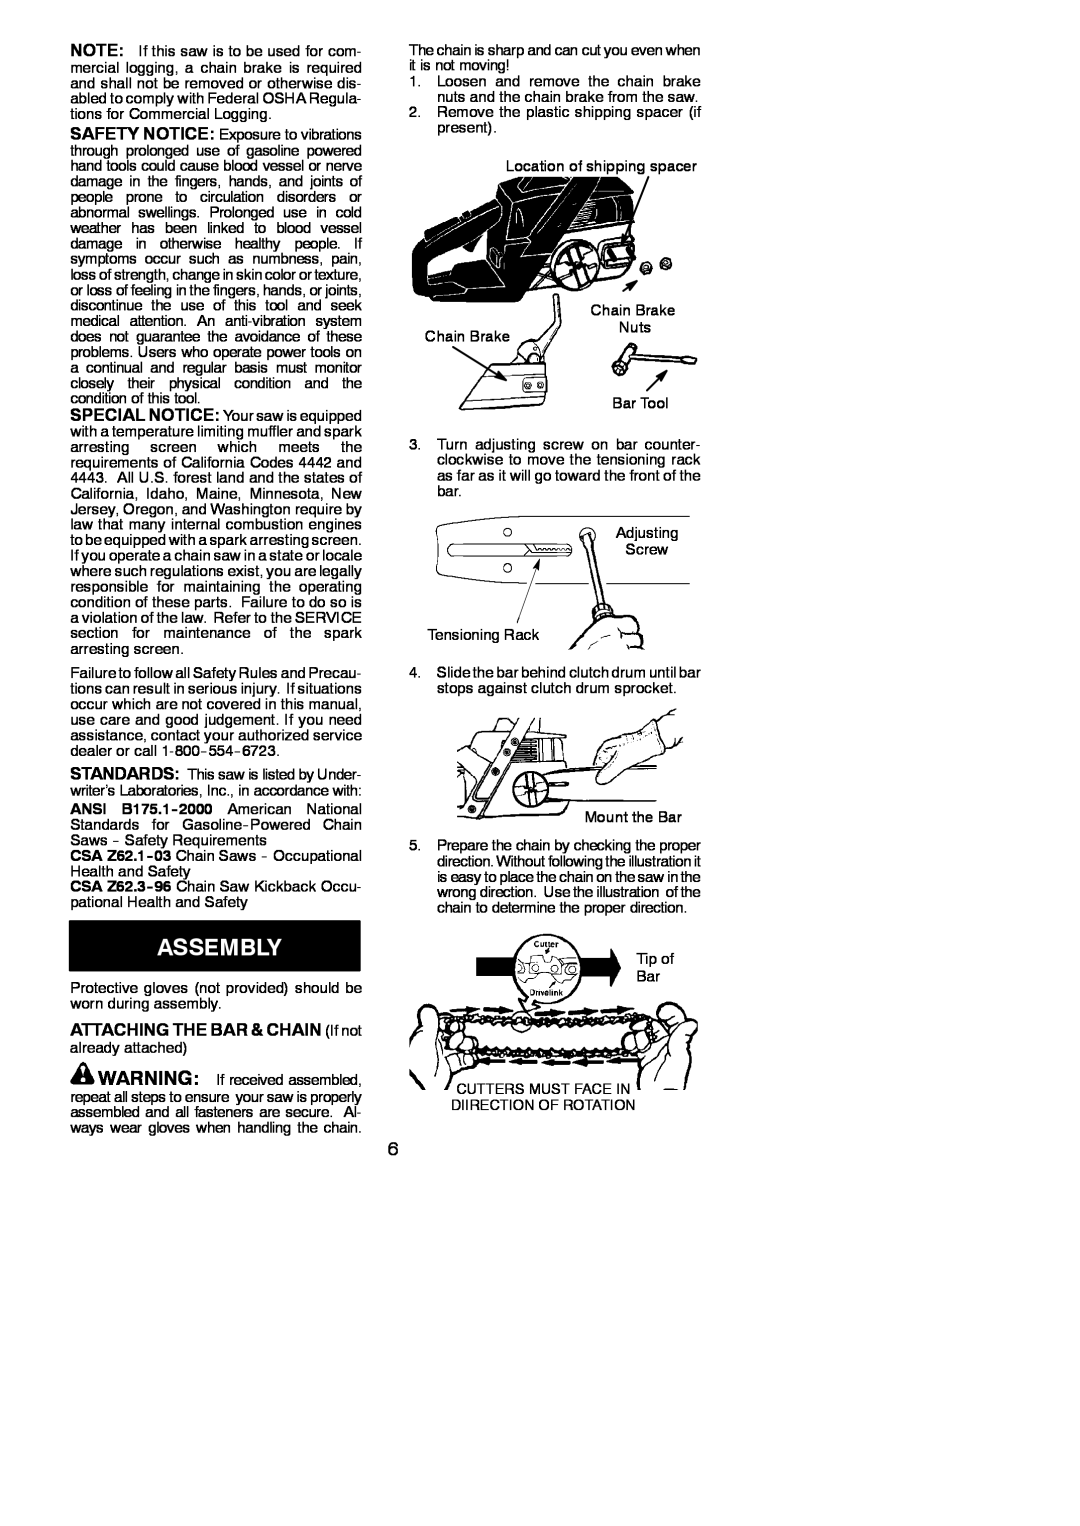 Poulan 530165225, 2004-09 instruction manual Assembly, ATTACHING THE BAR & CHAIN If not 